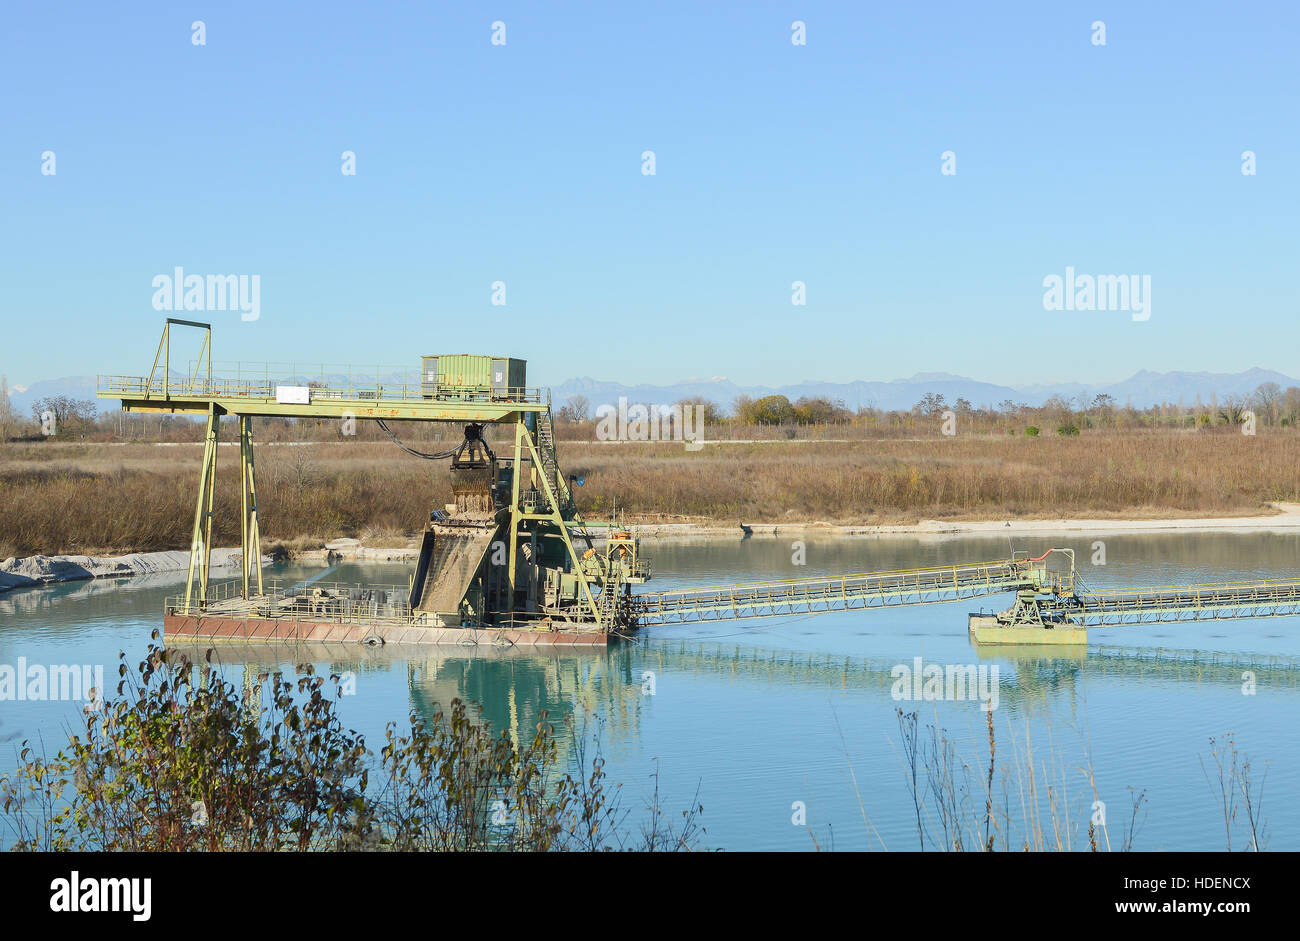 Gravel pit. Technology for extraction of gravel from a quarry filled with water. Stock Photo